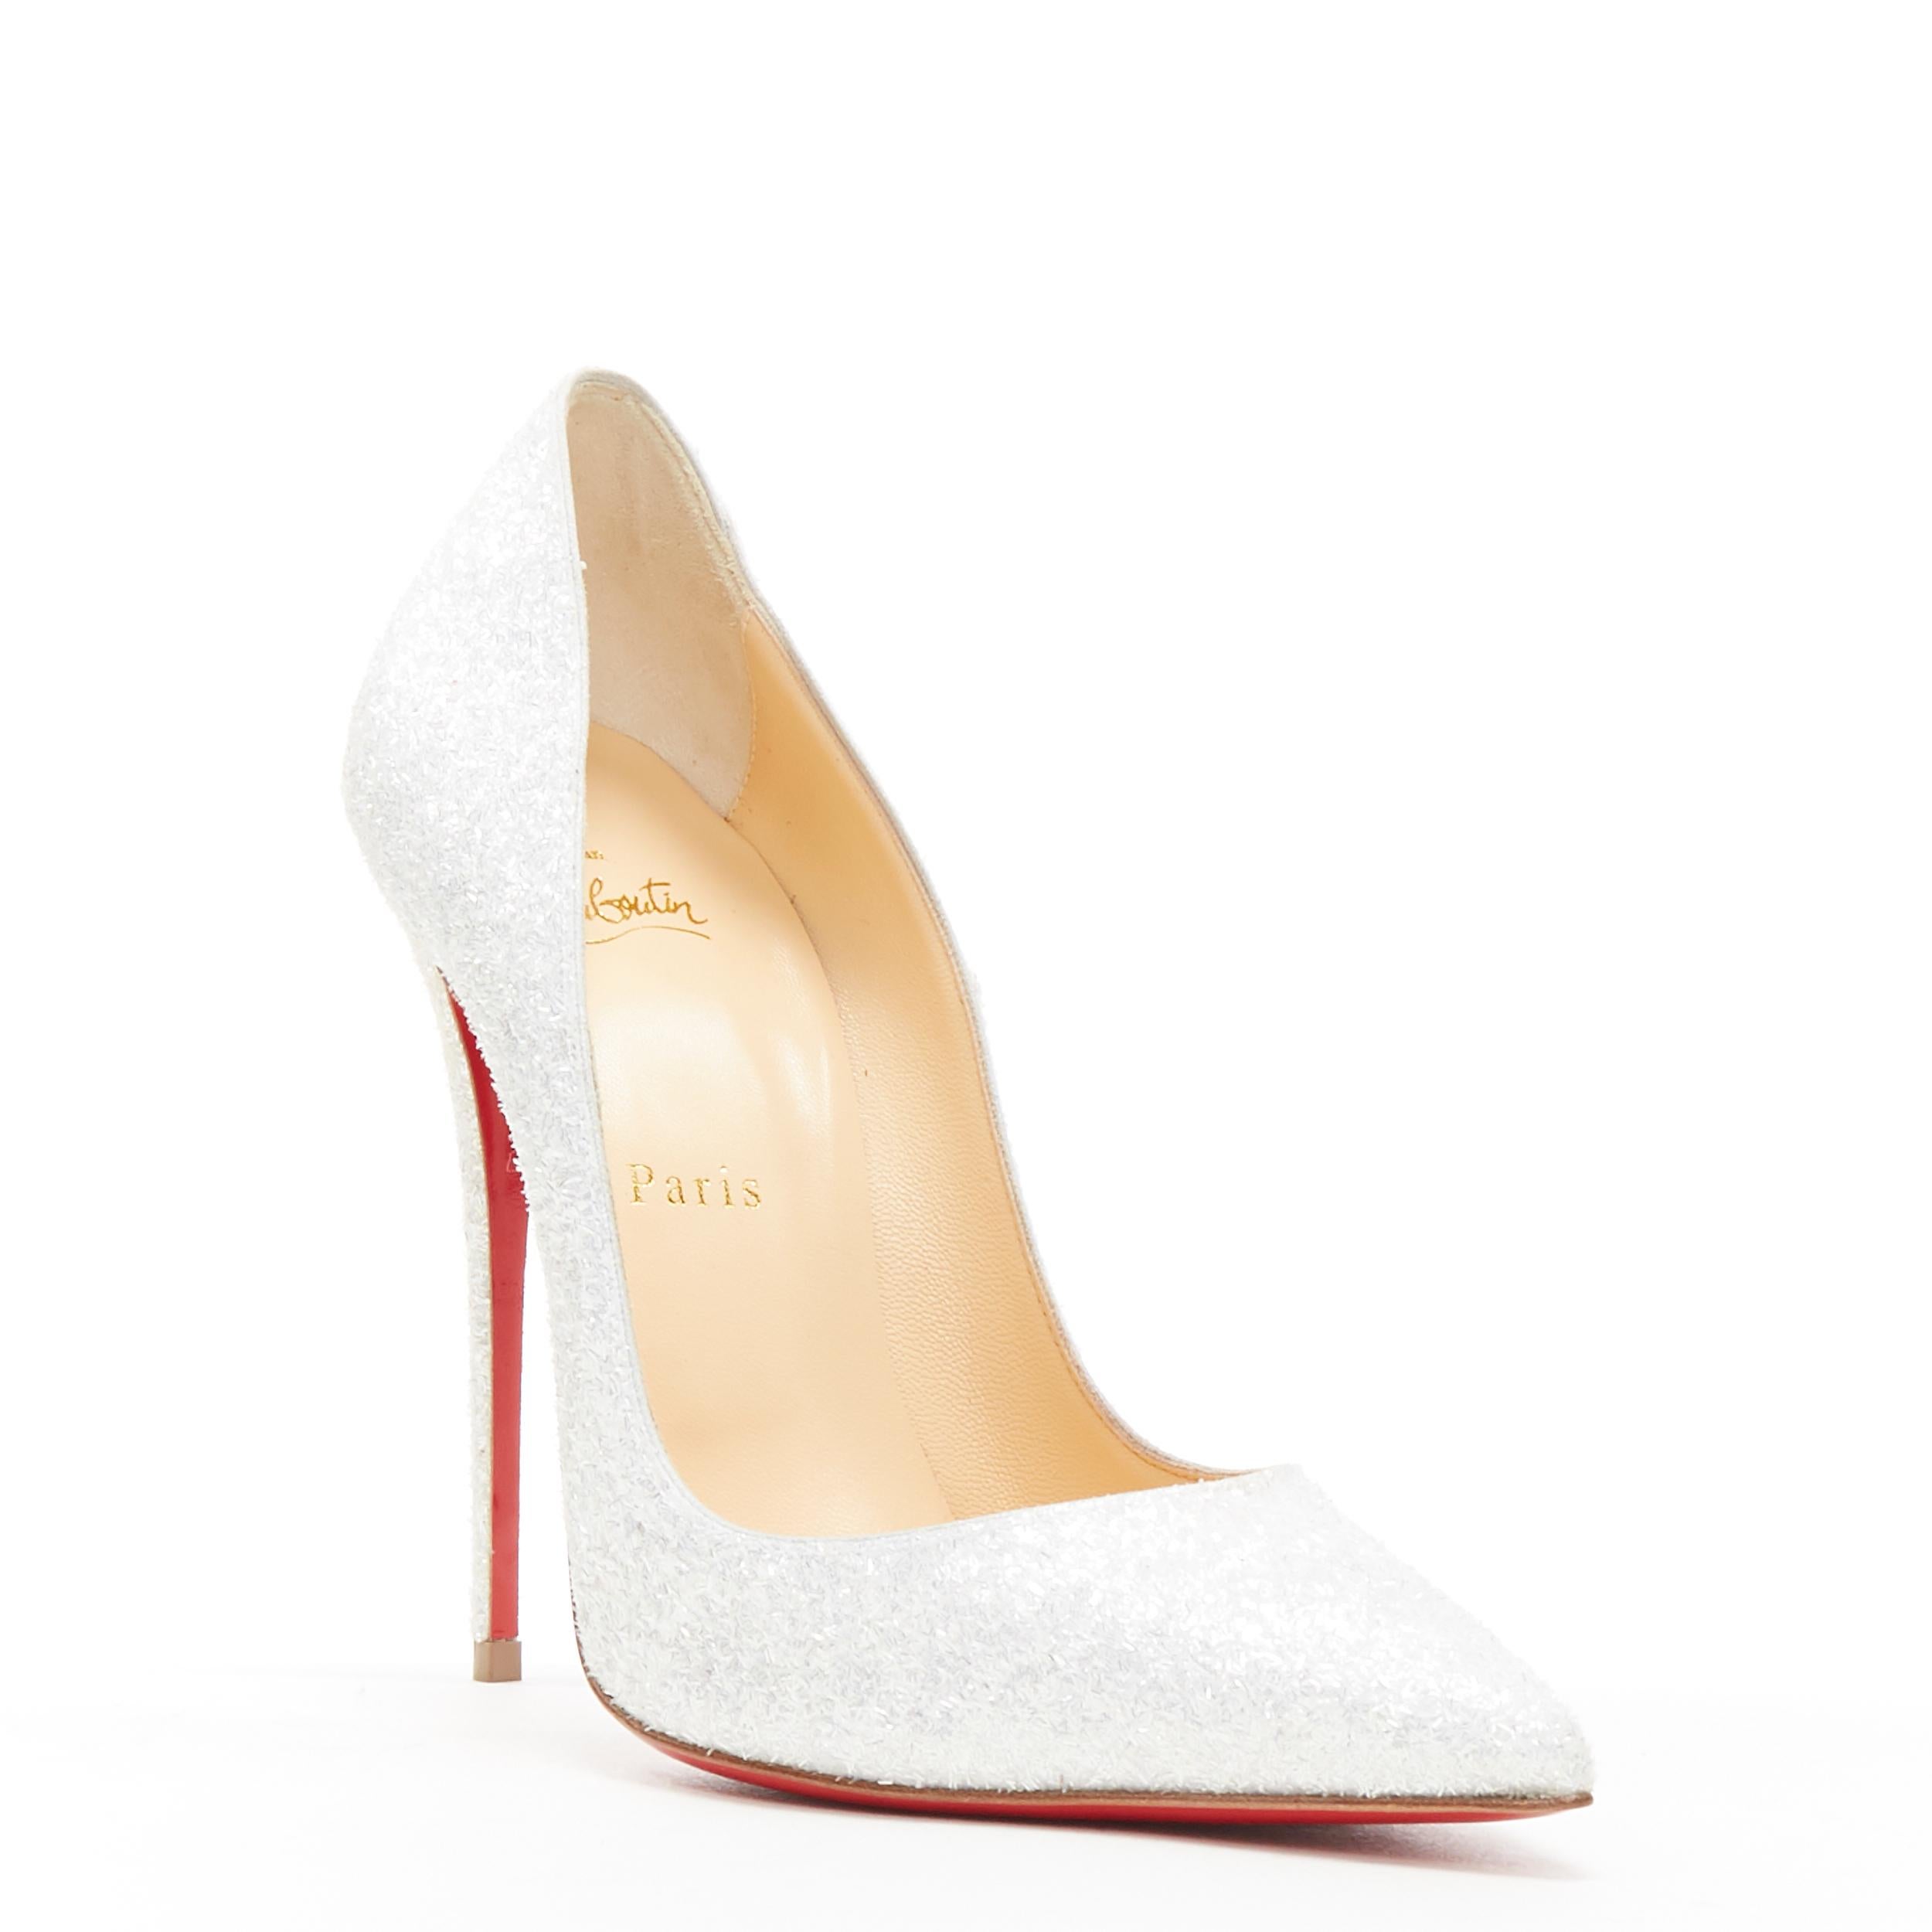 new CHRISTIAN LOUBOUTIN So Kate 120 white glitter pointy bridal pigalle EU39
Brand: Christian Louboutin
Designer: Christian Louboutin
Model Name / Style: So Kate 120
Material: Leather
Color: White
Pattern: Solid
Extra Detail: Style code: 1190030